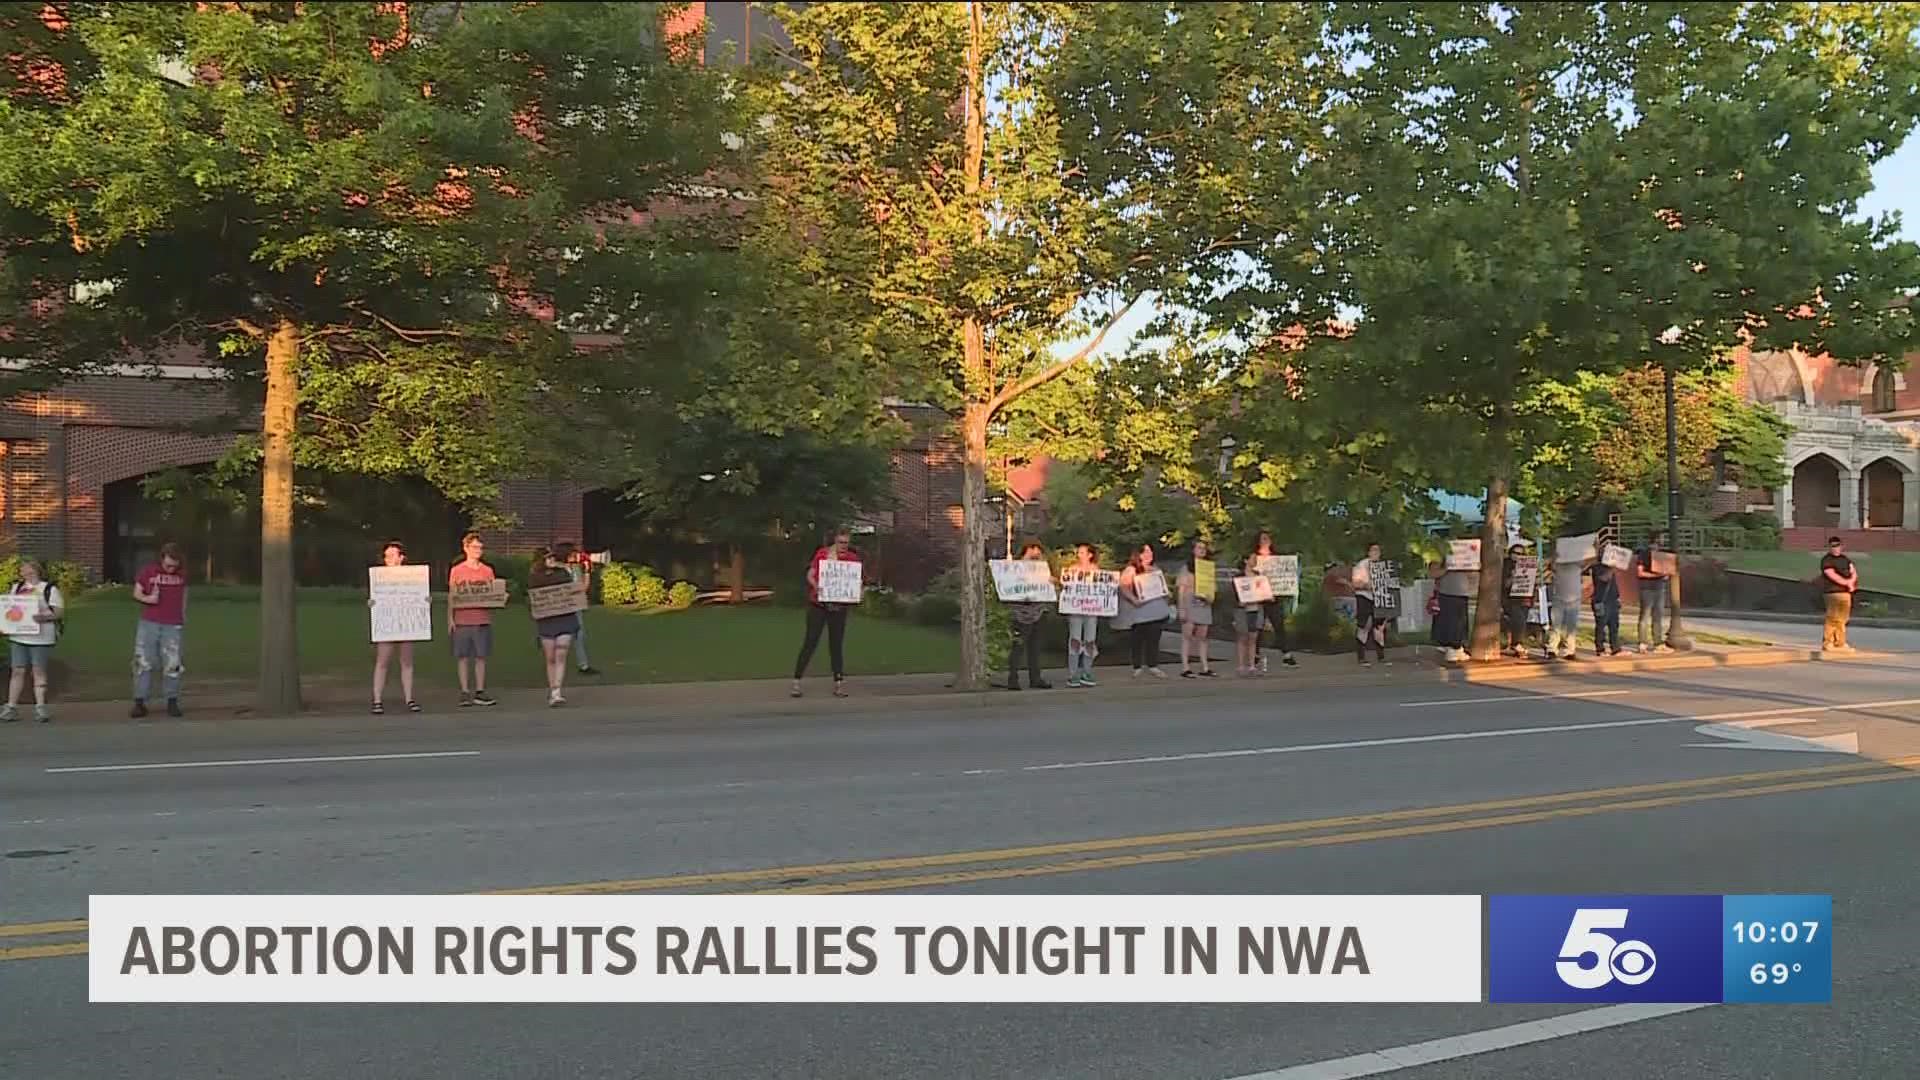 A Peaceful Protest for Reproductive Rights is taking place every night at 6:30 p.m. at the Bentonville Square fountain through Friday, June 1.